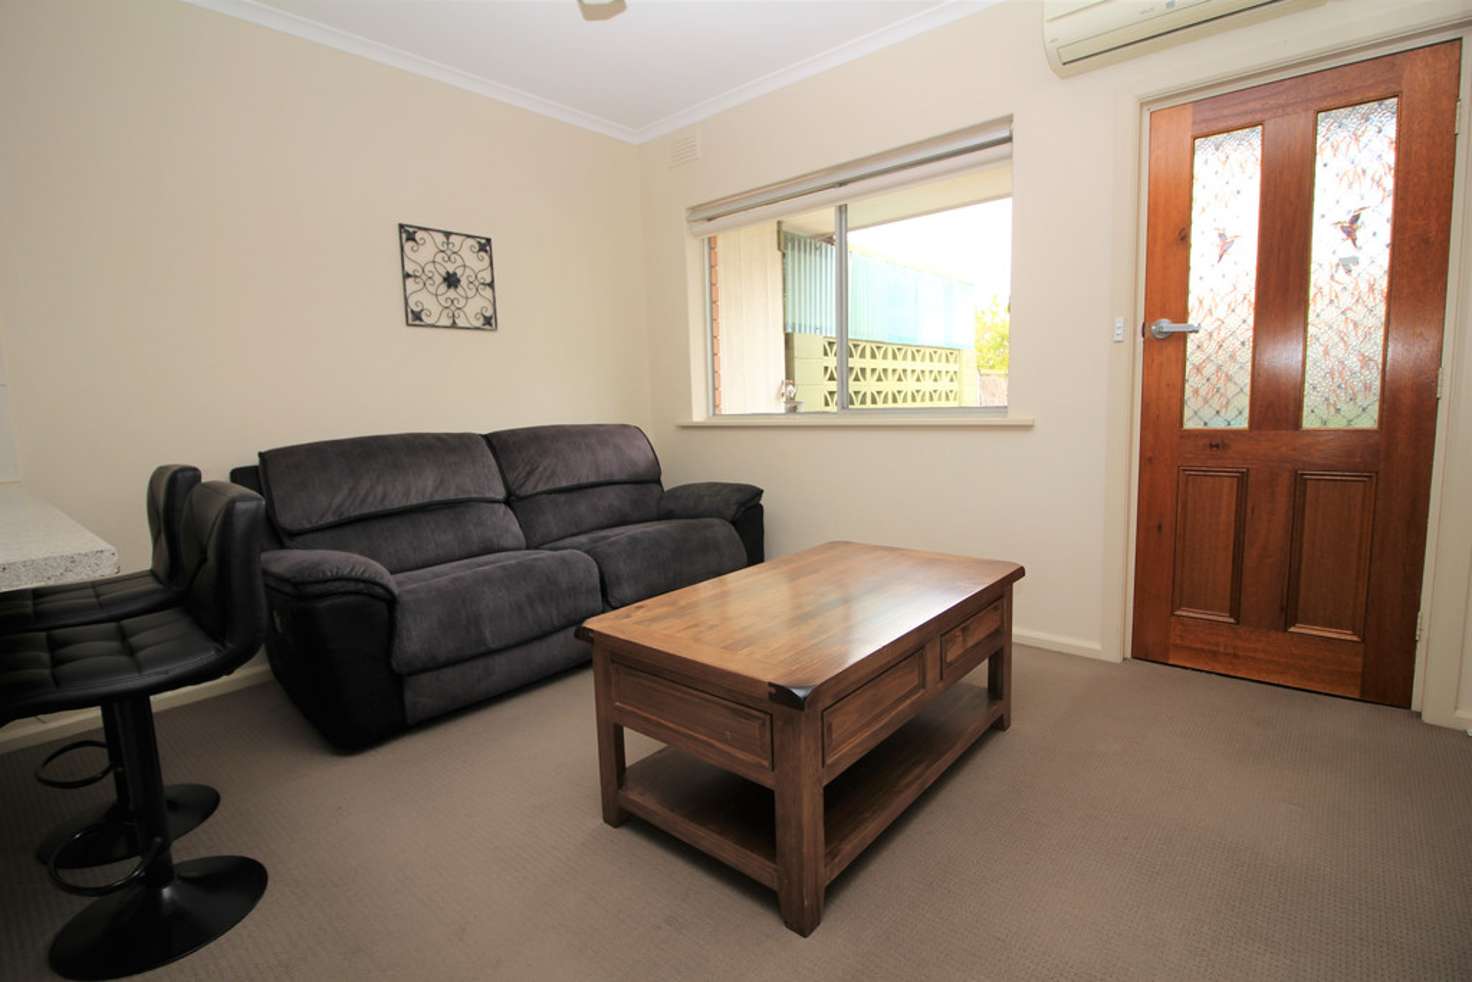 Main view of Homely house listing, 7/14 Doughty Street, Mount Gambier SA 5290